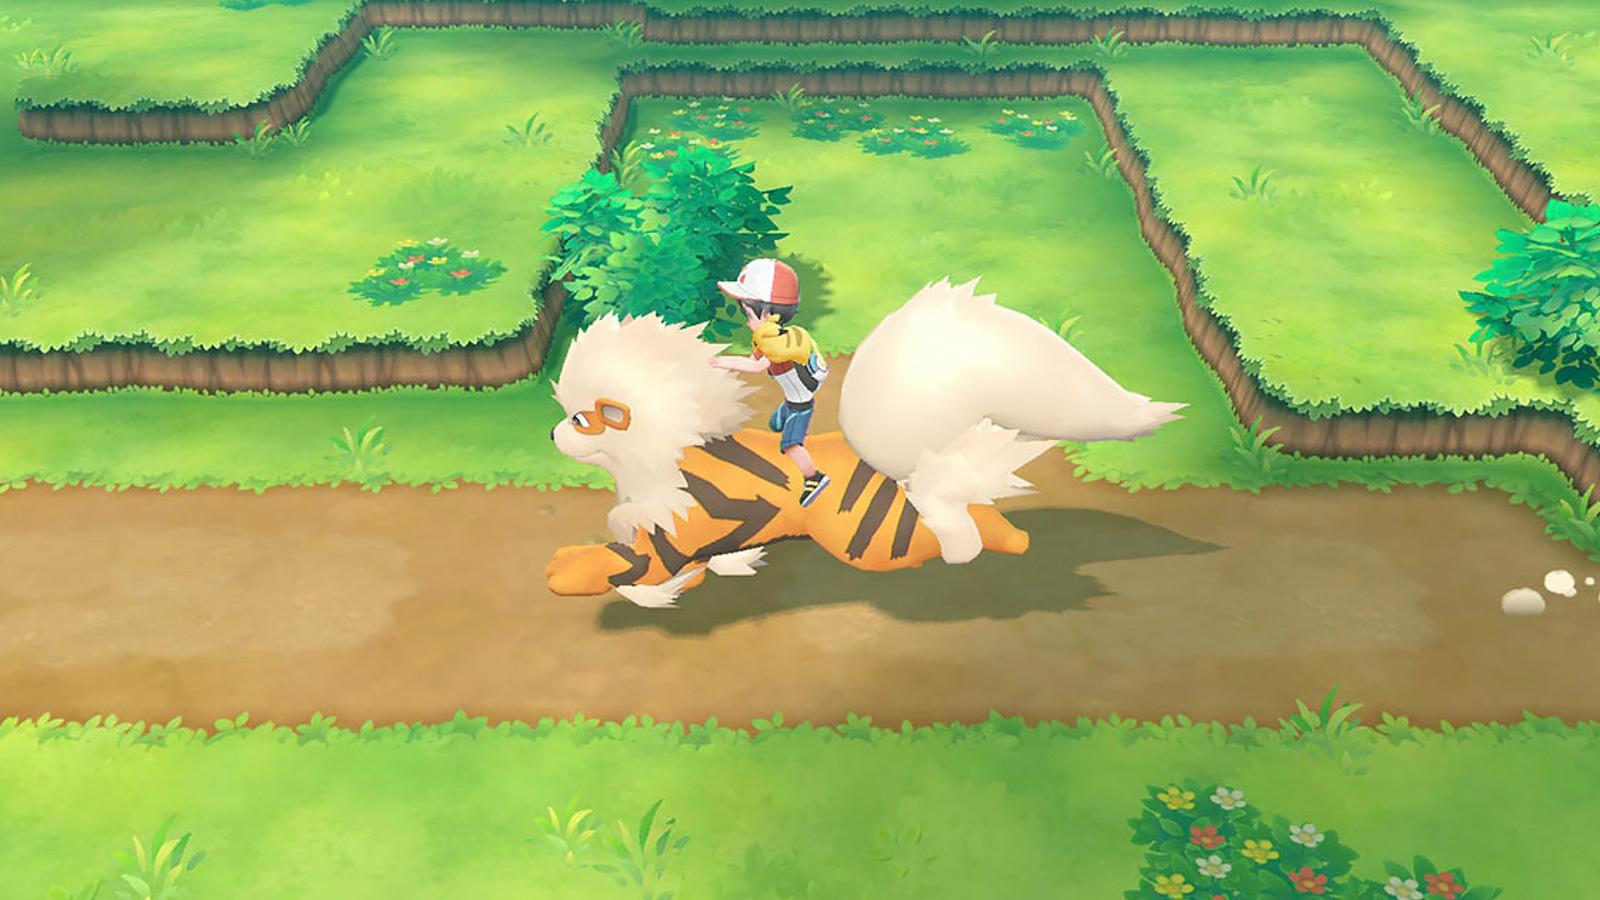 Screenshot of Pokemon Let's Go protagonist riding on top of an Arcanine.